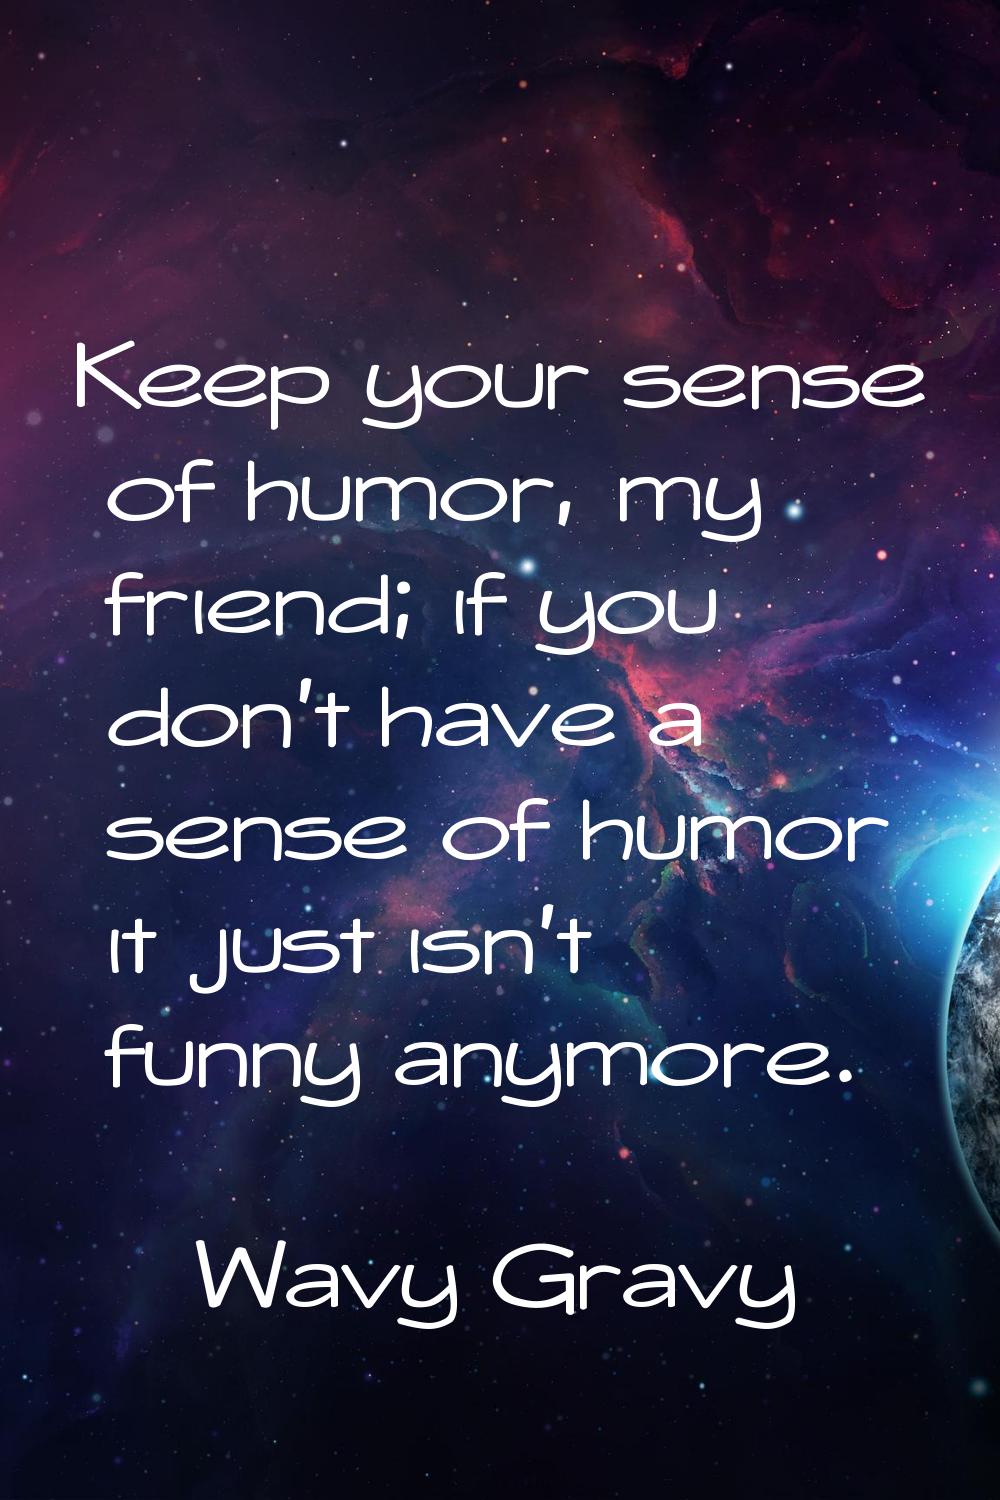 Keep your sense of humor, my friend; if you don't have a sense of humor it just isn't funny anymore